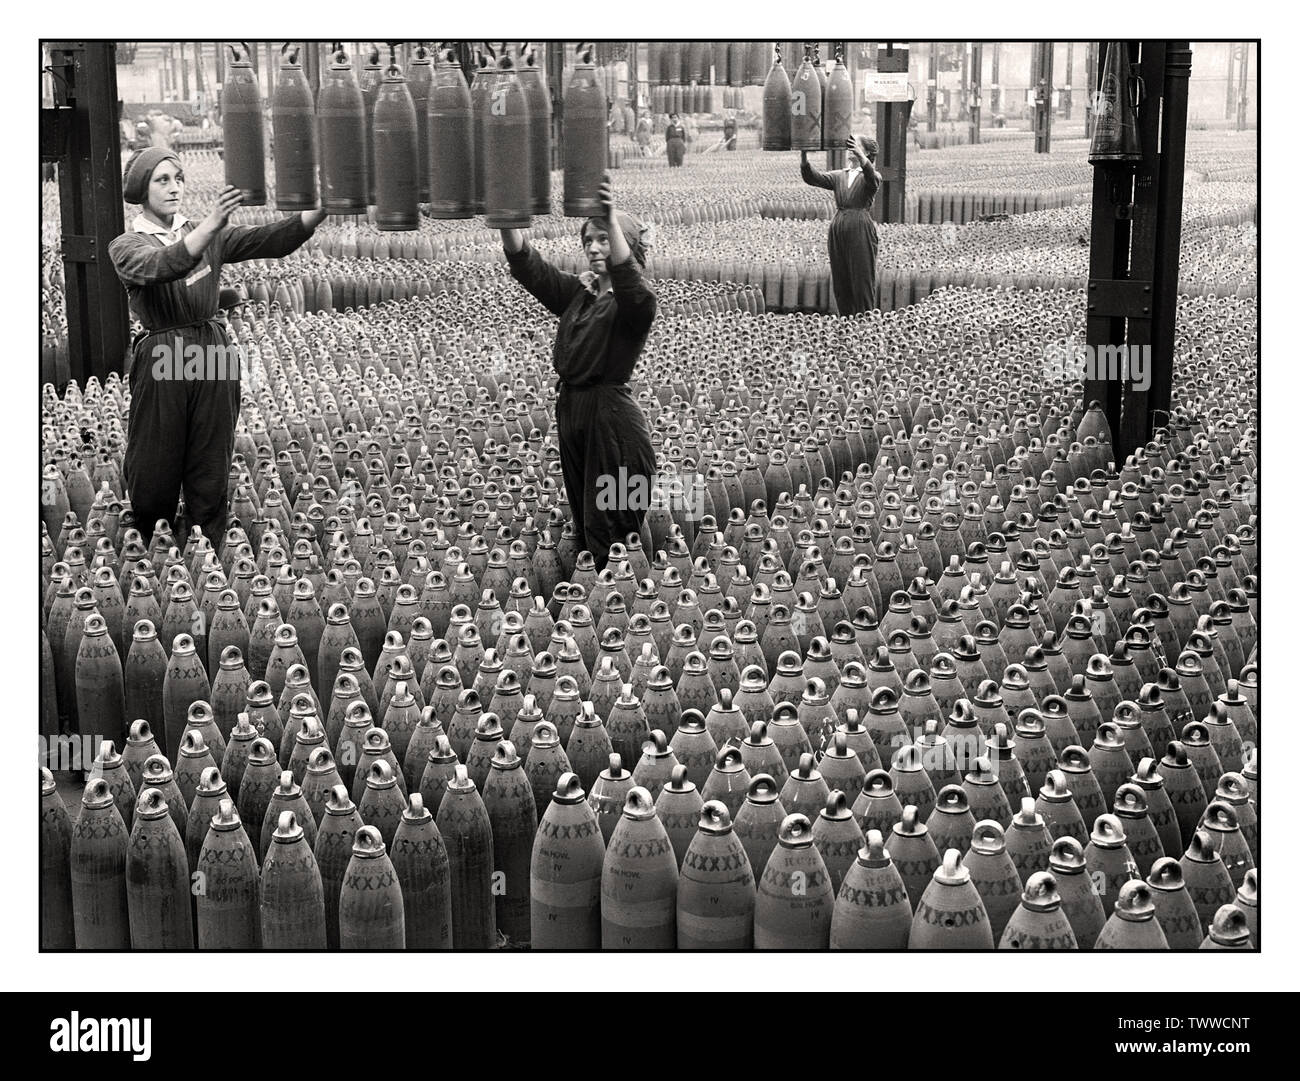 Vintage 1915 World War 1 Factory Shell Munitions Female women war work Production Information Propaganda image of the extensive Chilwell munitions filling factory, Britain WW1 More than 19 million infantry and naval shells were filled with explosives here by 10,000 workers between 1915-1918, during World War 1. The factory filled 50% of all British shells during the Great First World War. Stock Photo